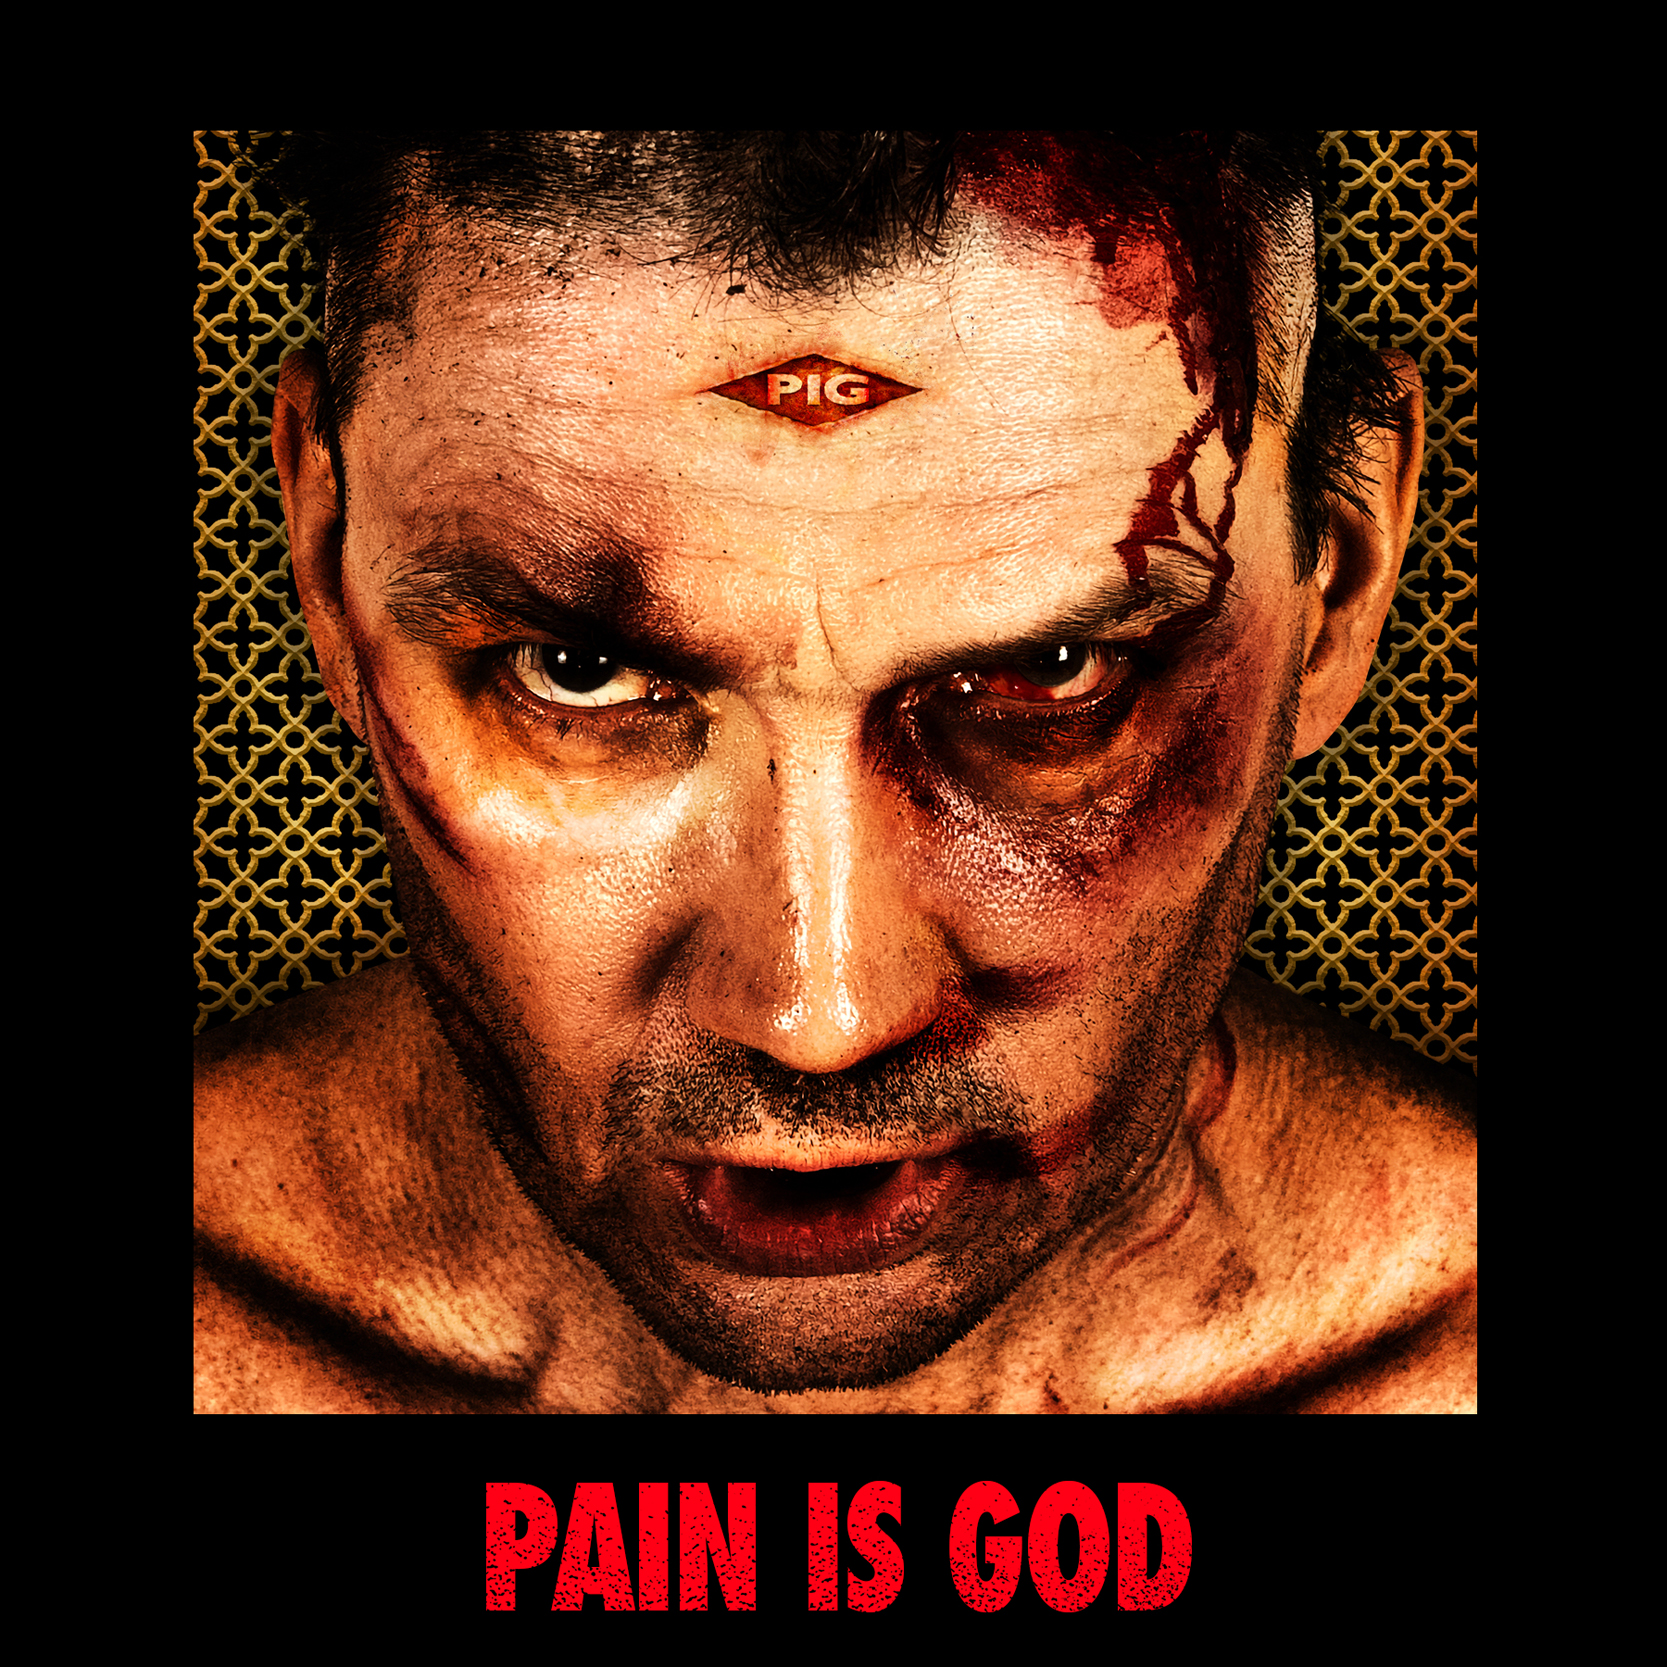 PAIN IS GOD BY PIG